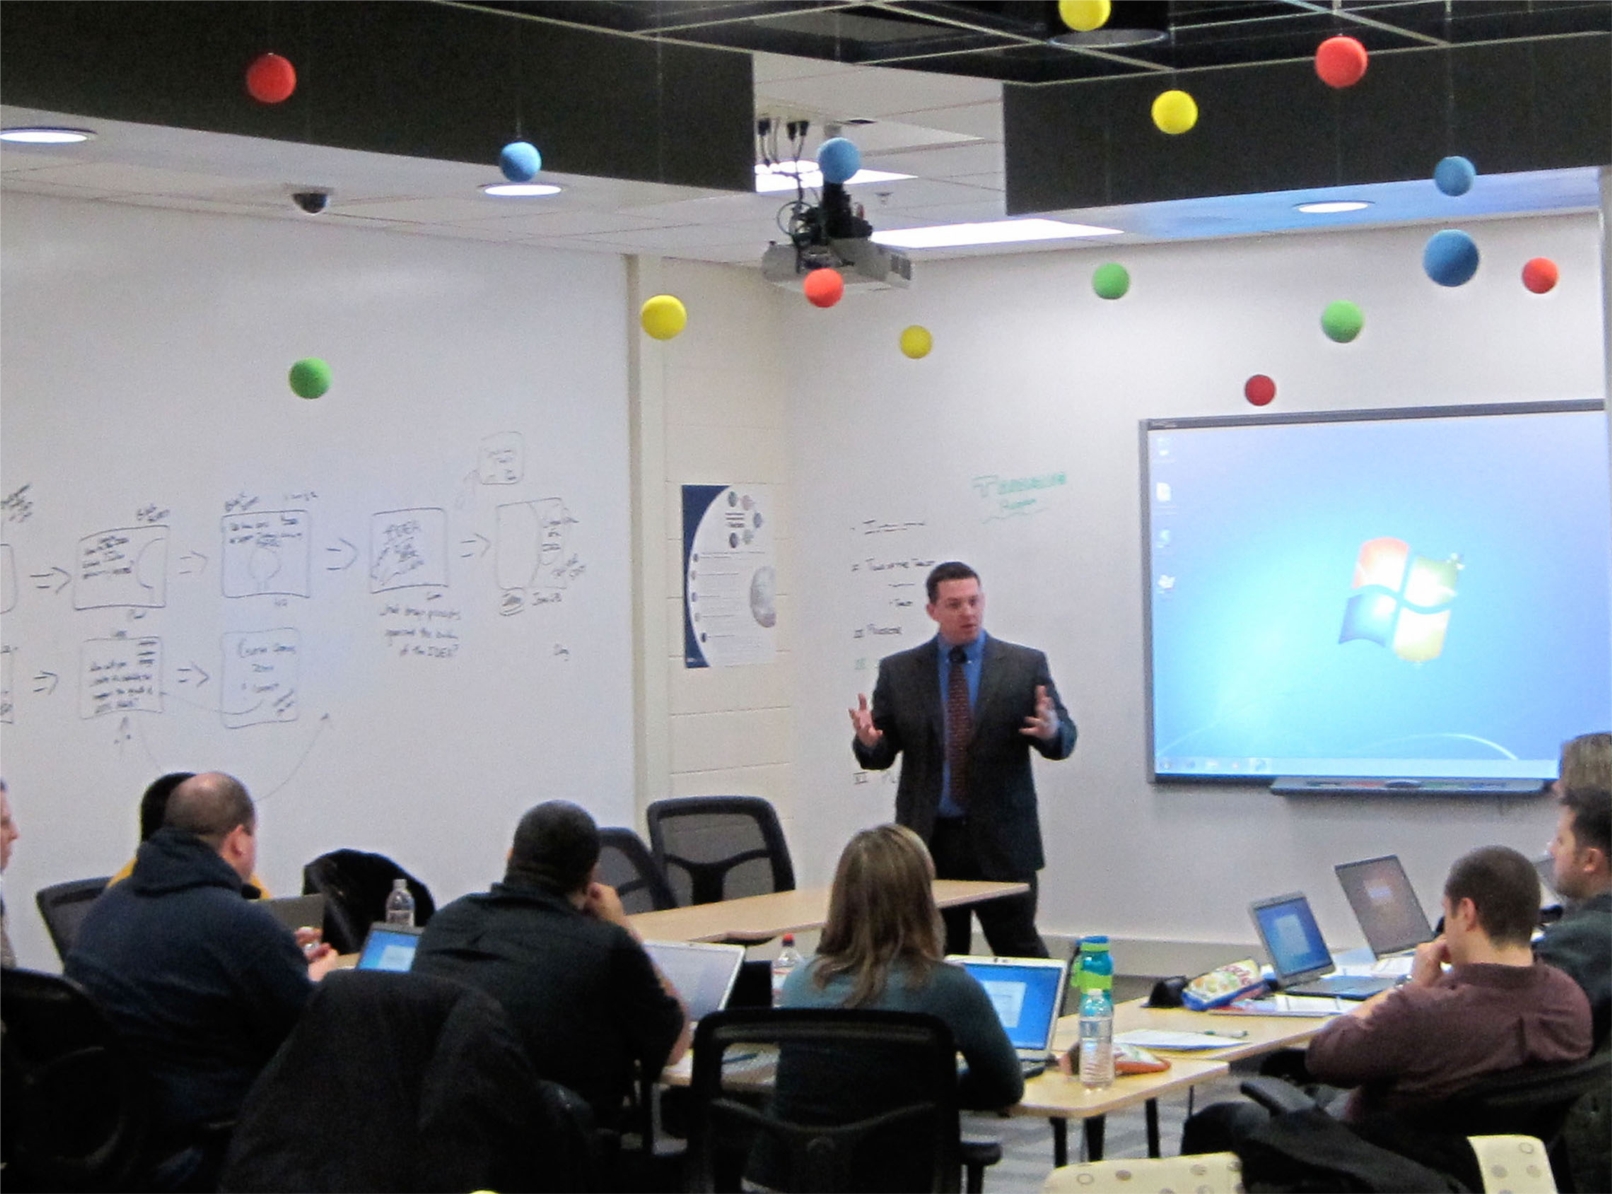 Teacher receive technology training in an innovative new room at GBN called the IDEA.